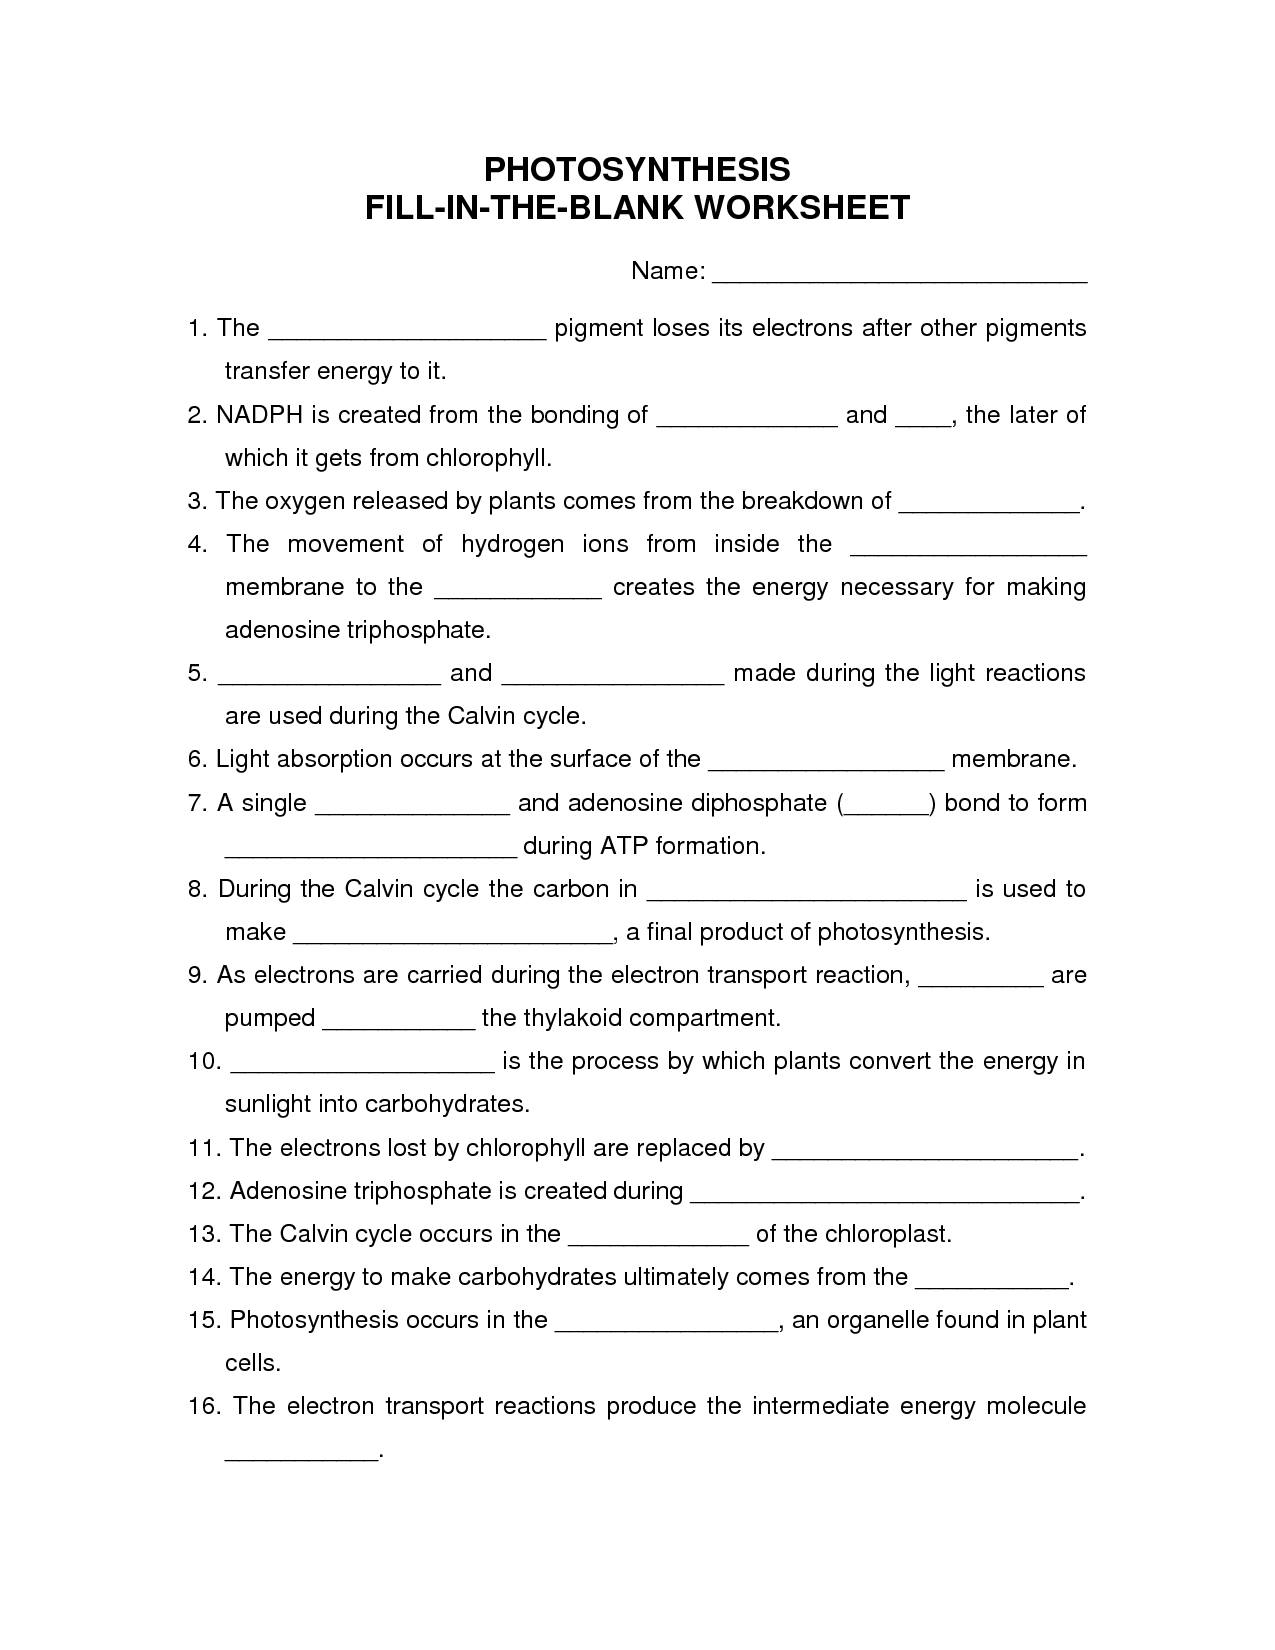 Fill in the Blank Worksheets Answers Image